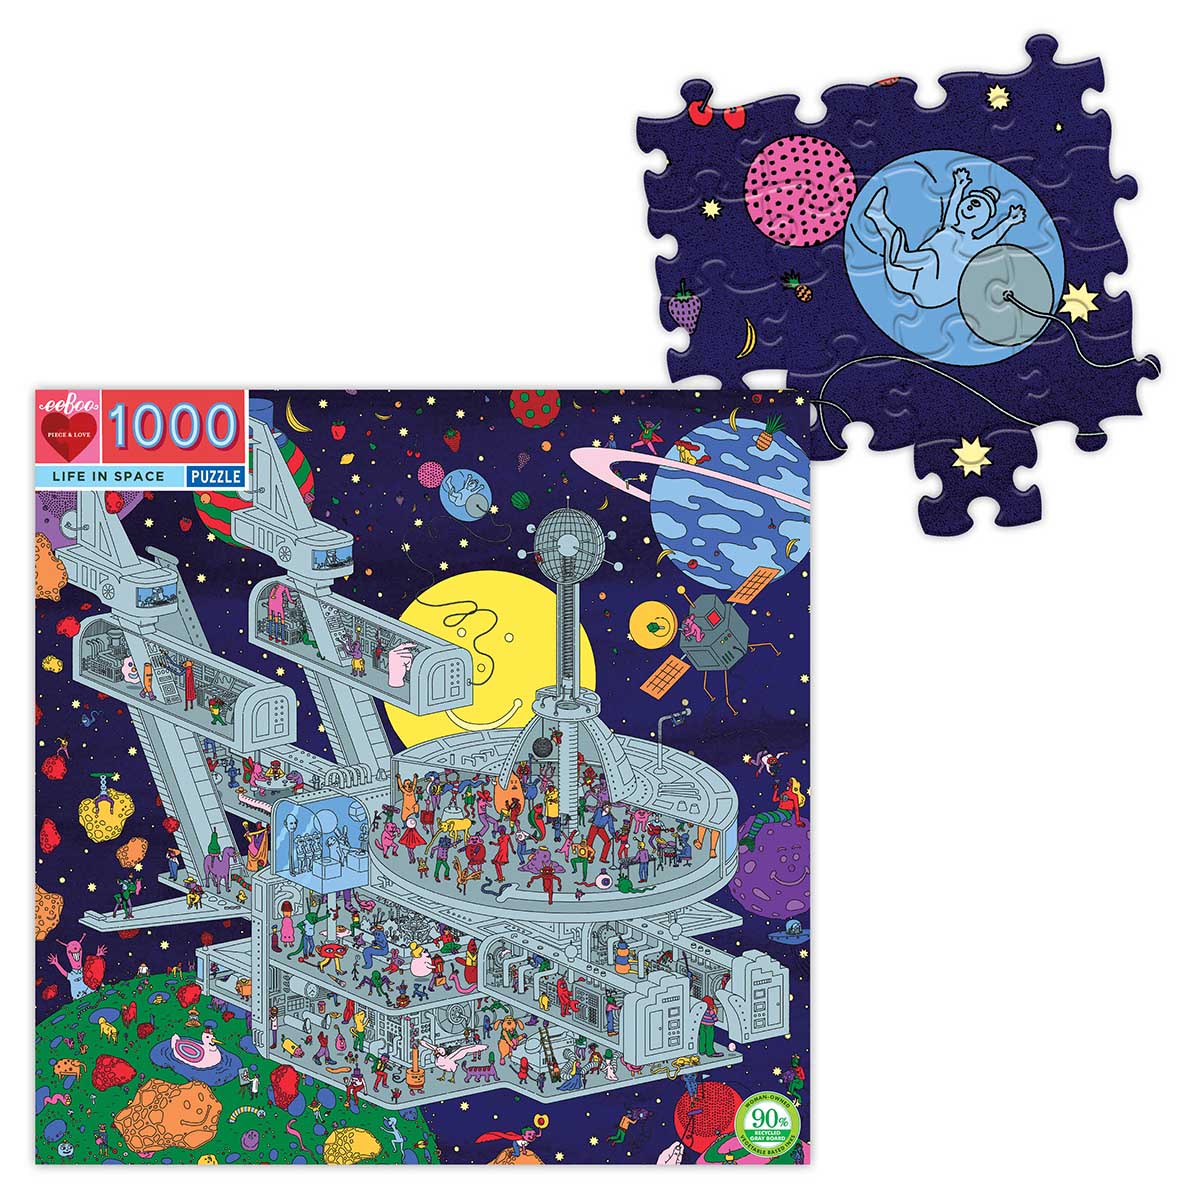 Outer Space Space Jigsaw Puzzle By Turner